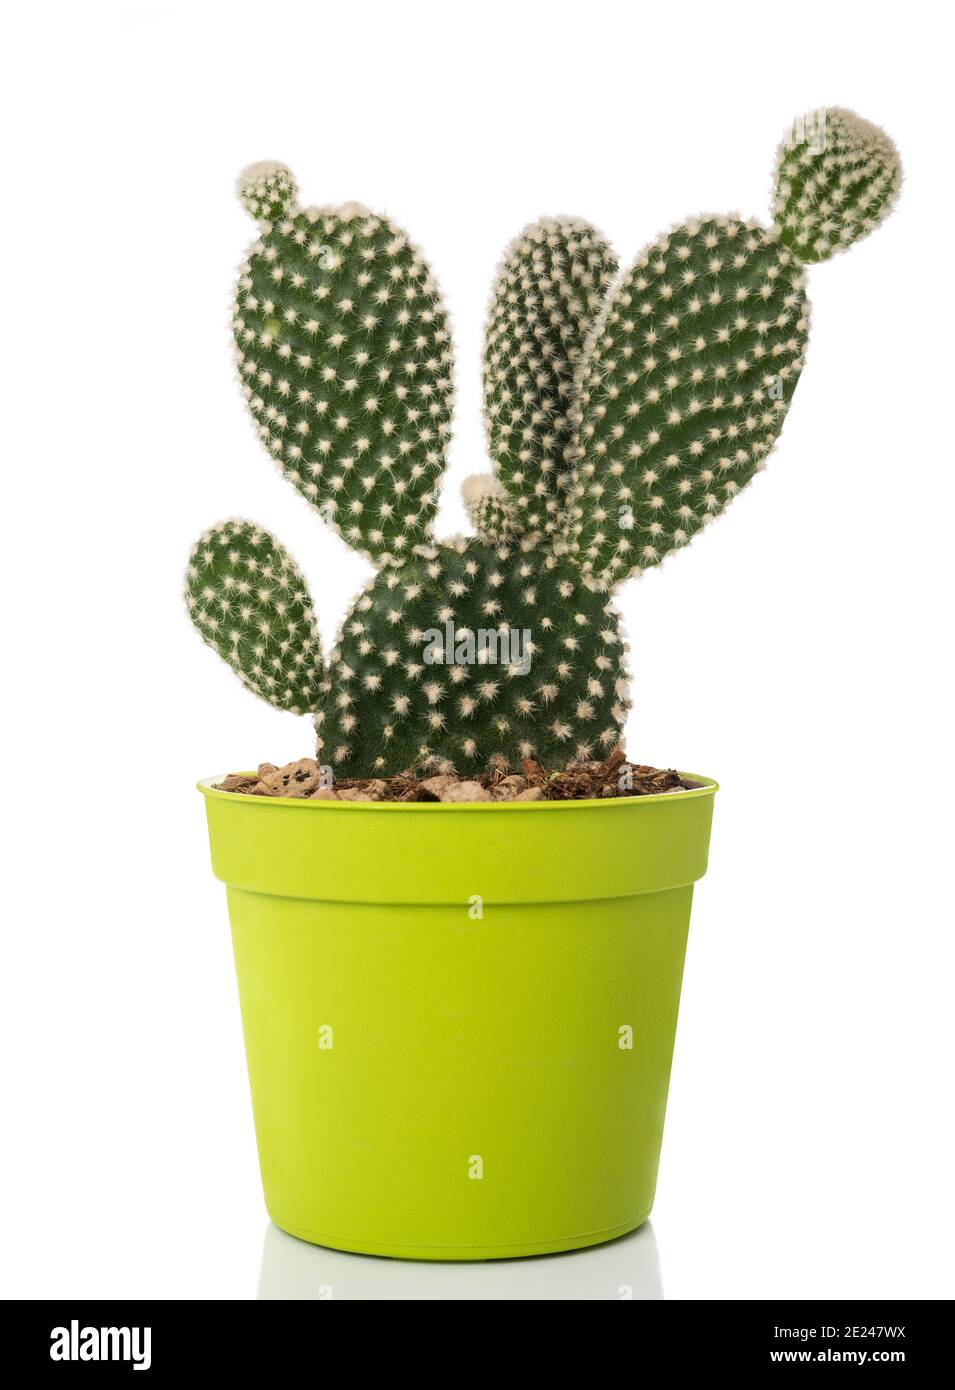 Bunny ears cactus in vase isolated on white Stock Photo